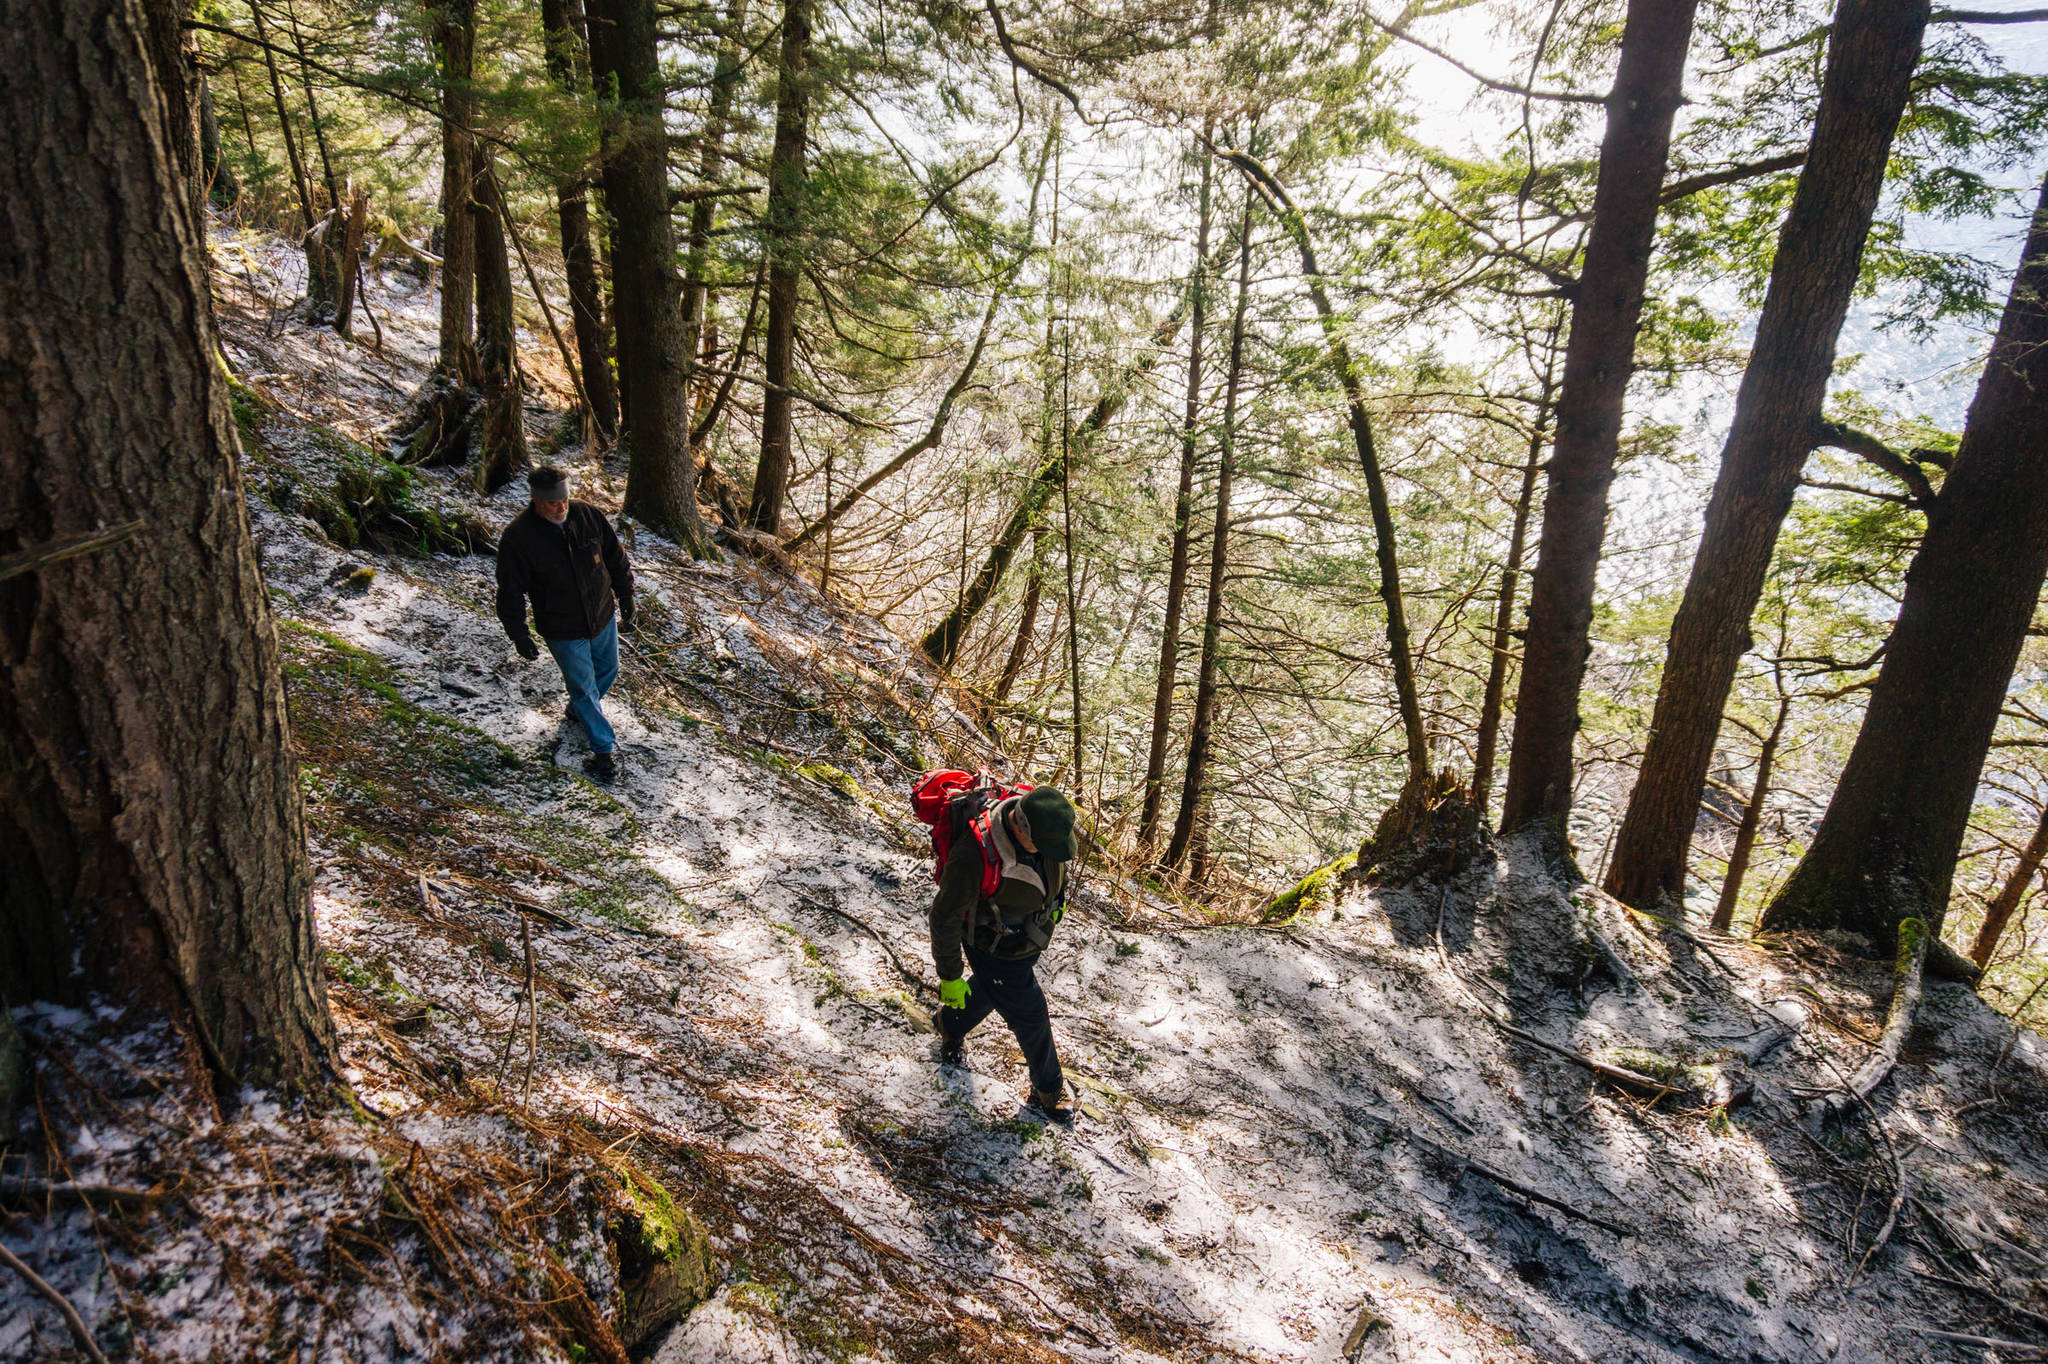 Brian Donohoe, the photographer’s father, left, and his friend Stan headed back on DuPont Trail Wednesday. Sunshine streams through, lighting up under the canopy. (Gabe Donohoe | For the Juneau Empire)